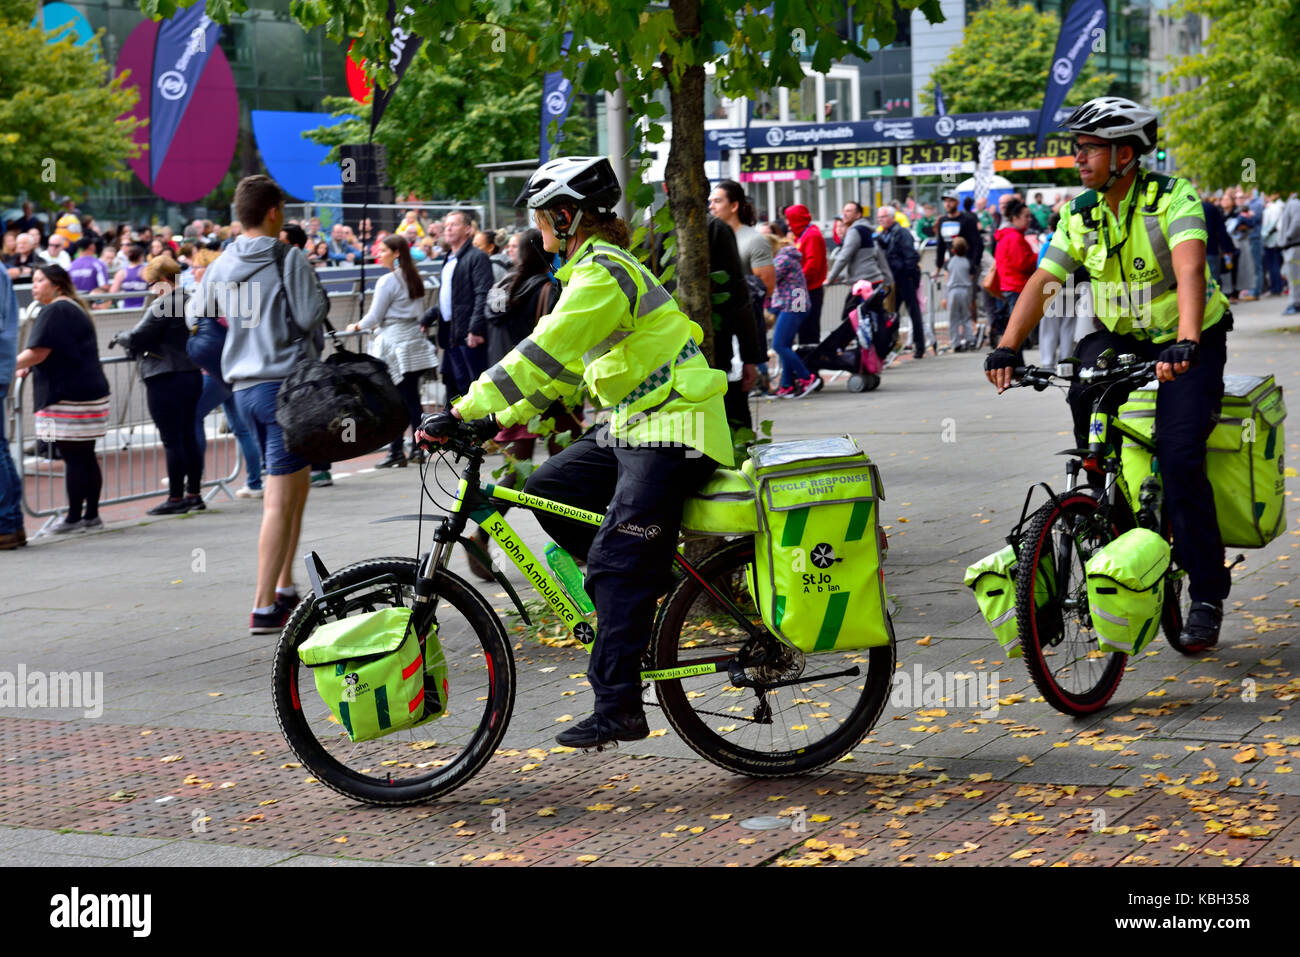 St John ambulance bicycle response personnel at event Stock Photo